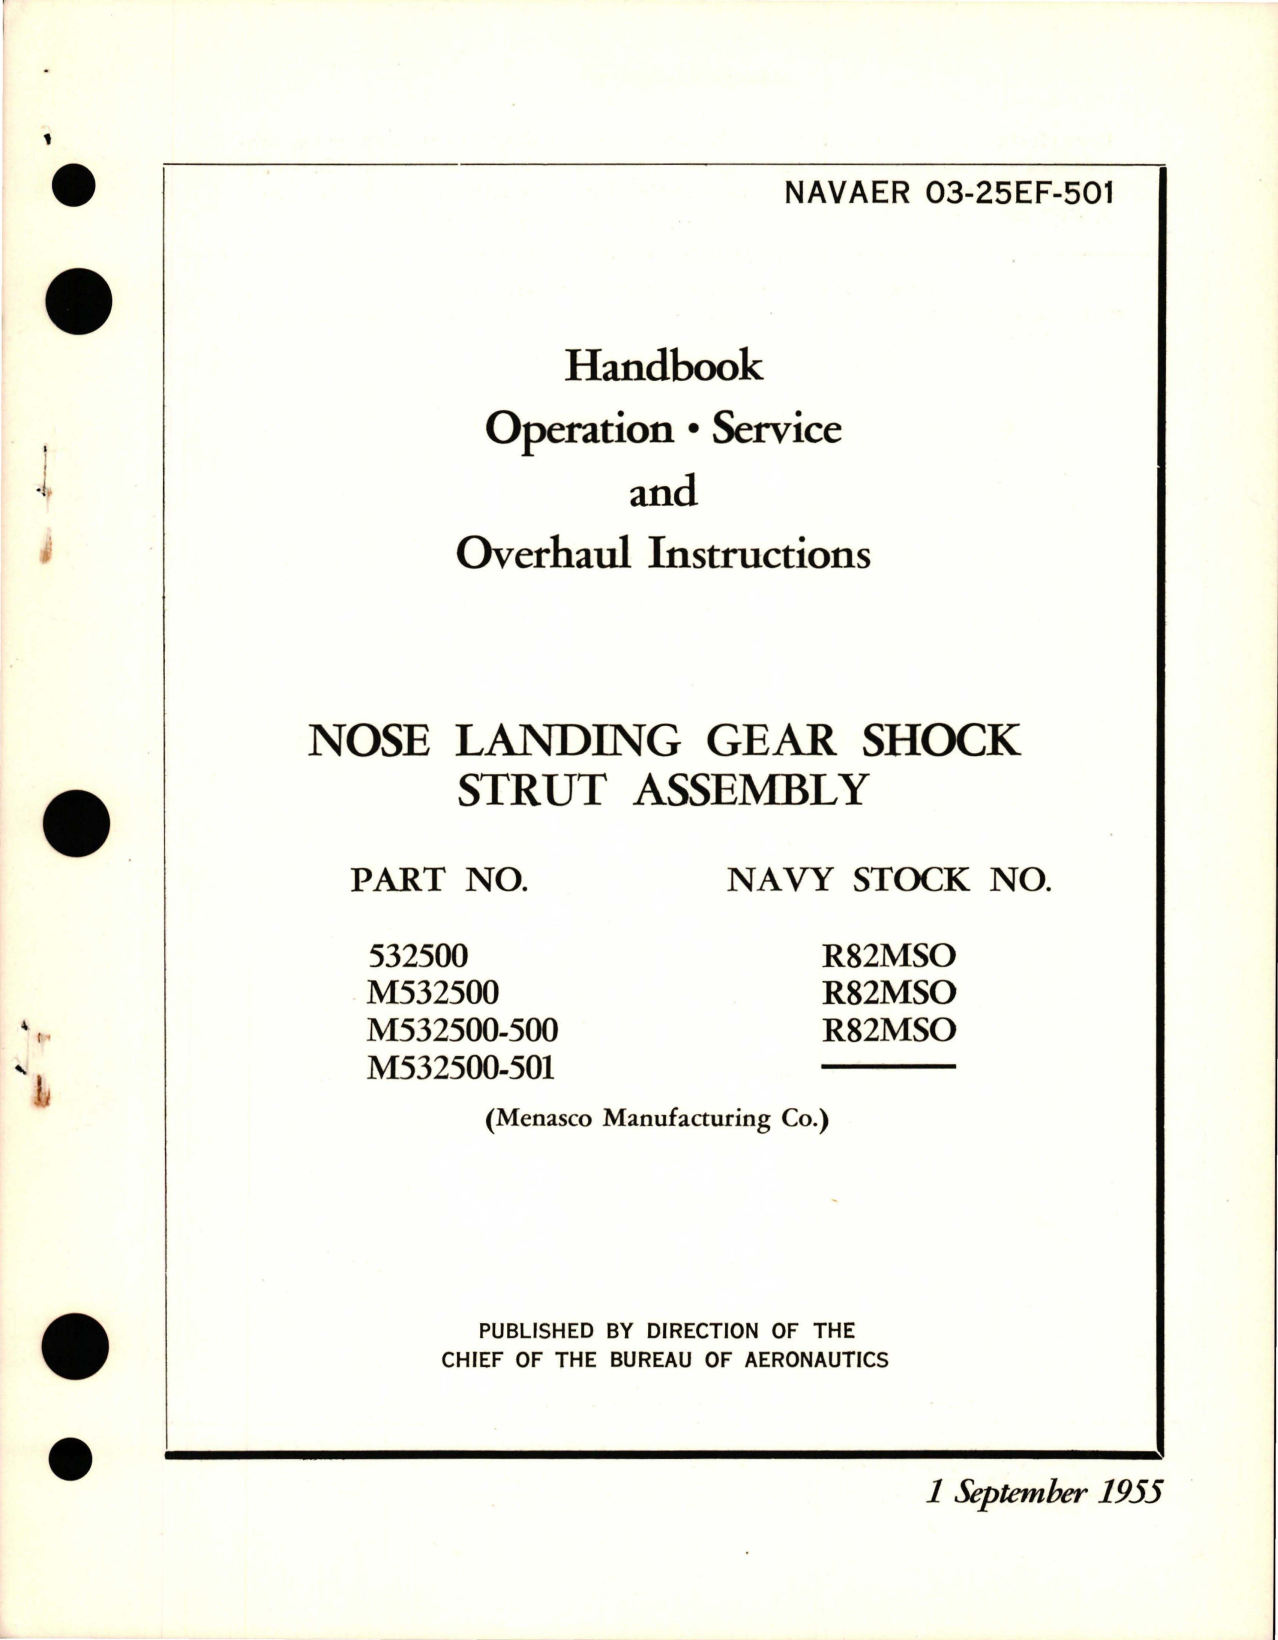 Sample page 1 from AirCorps Library document: Operation, Service and Overhaul Instructions for Nose Landing Gear Shock Strut Assembly - Parts 532500, M532500, M532500-500, M532500-501